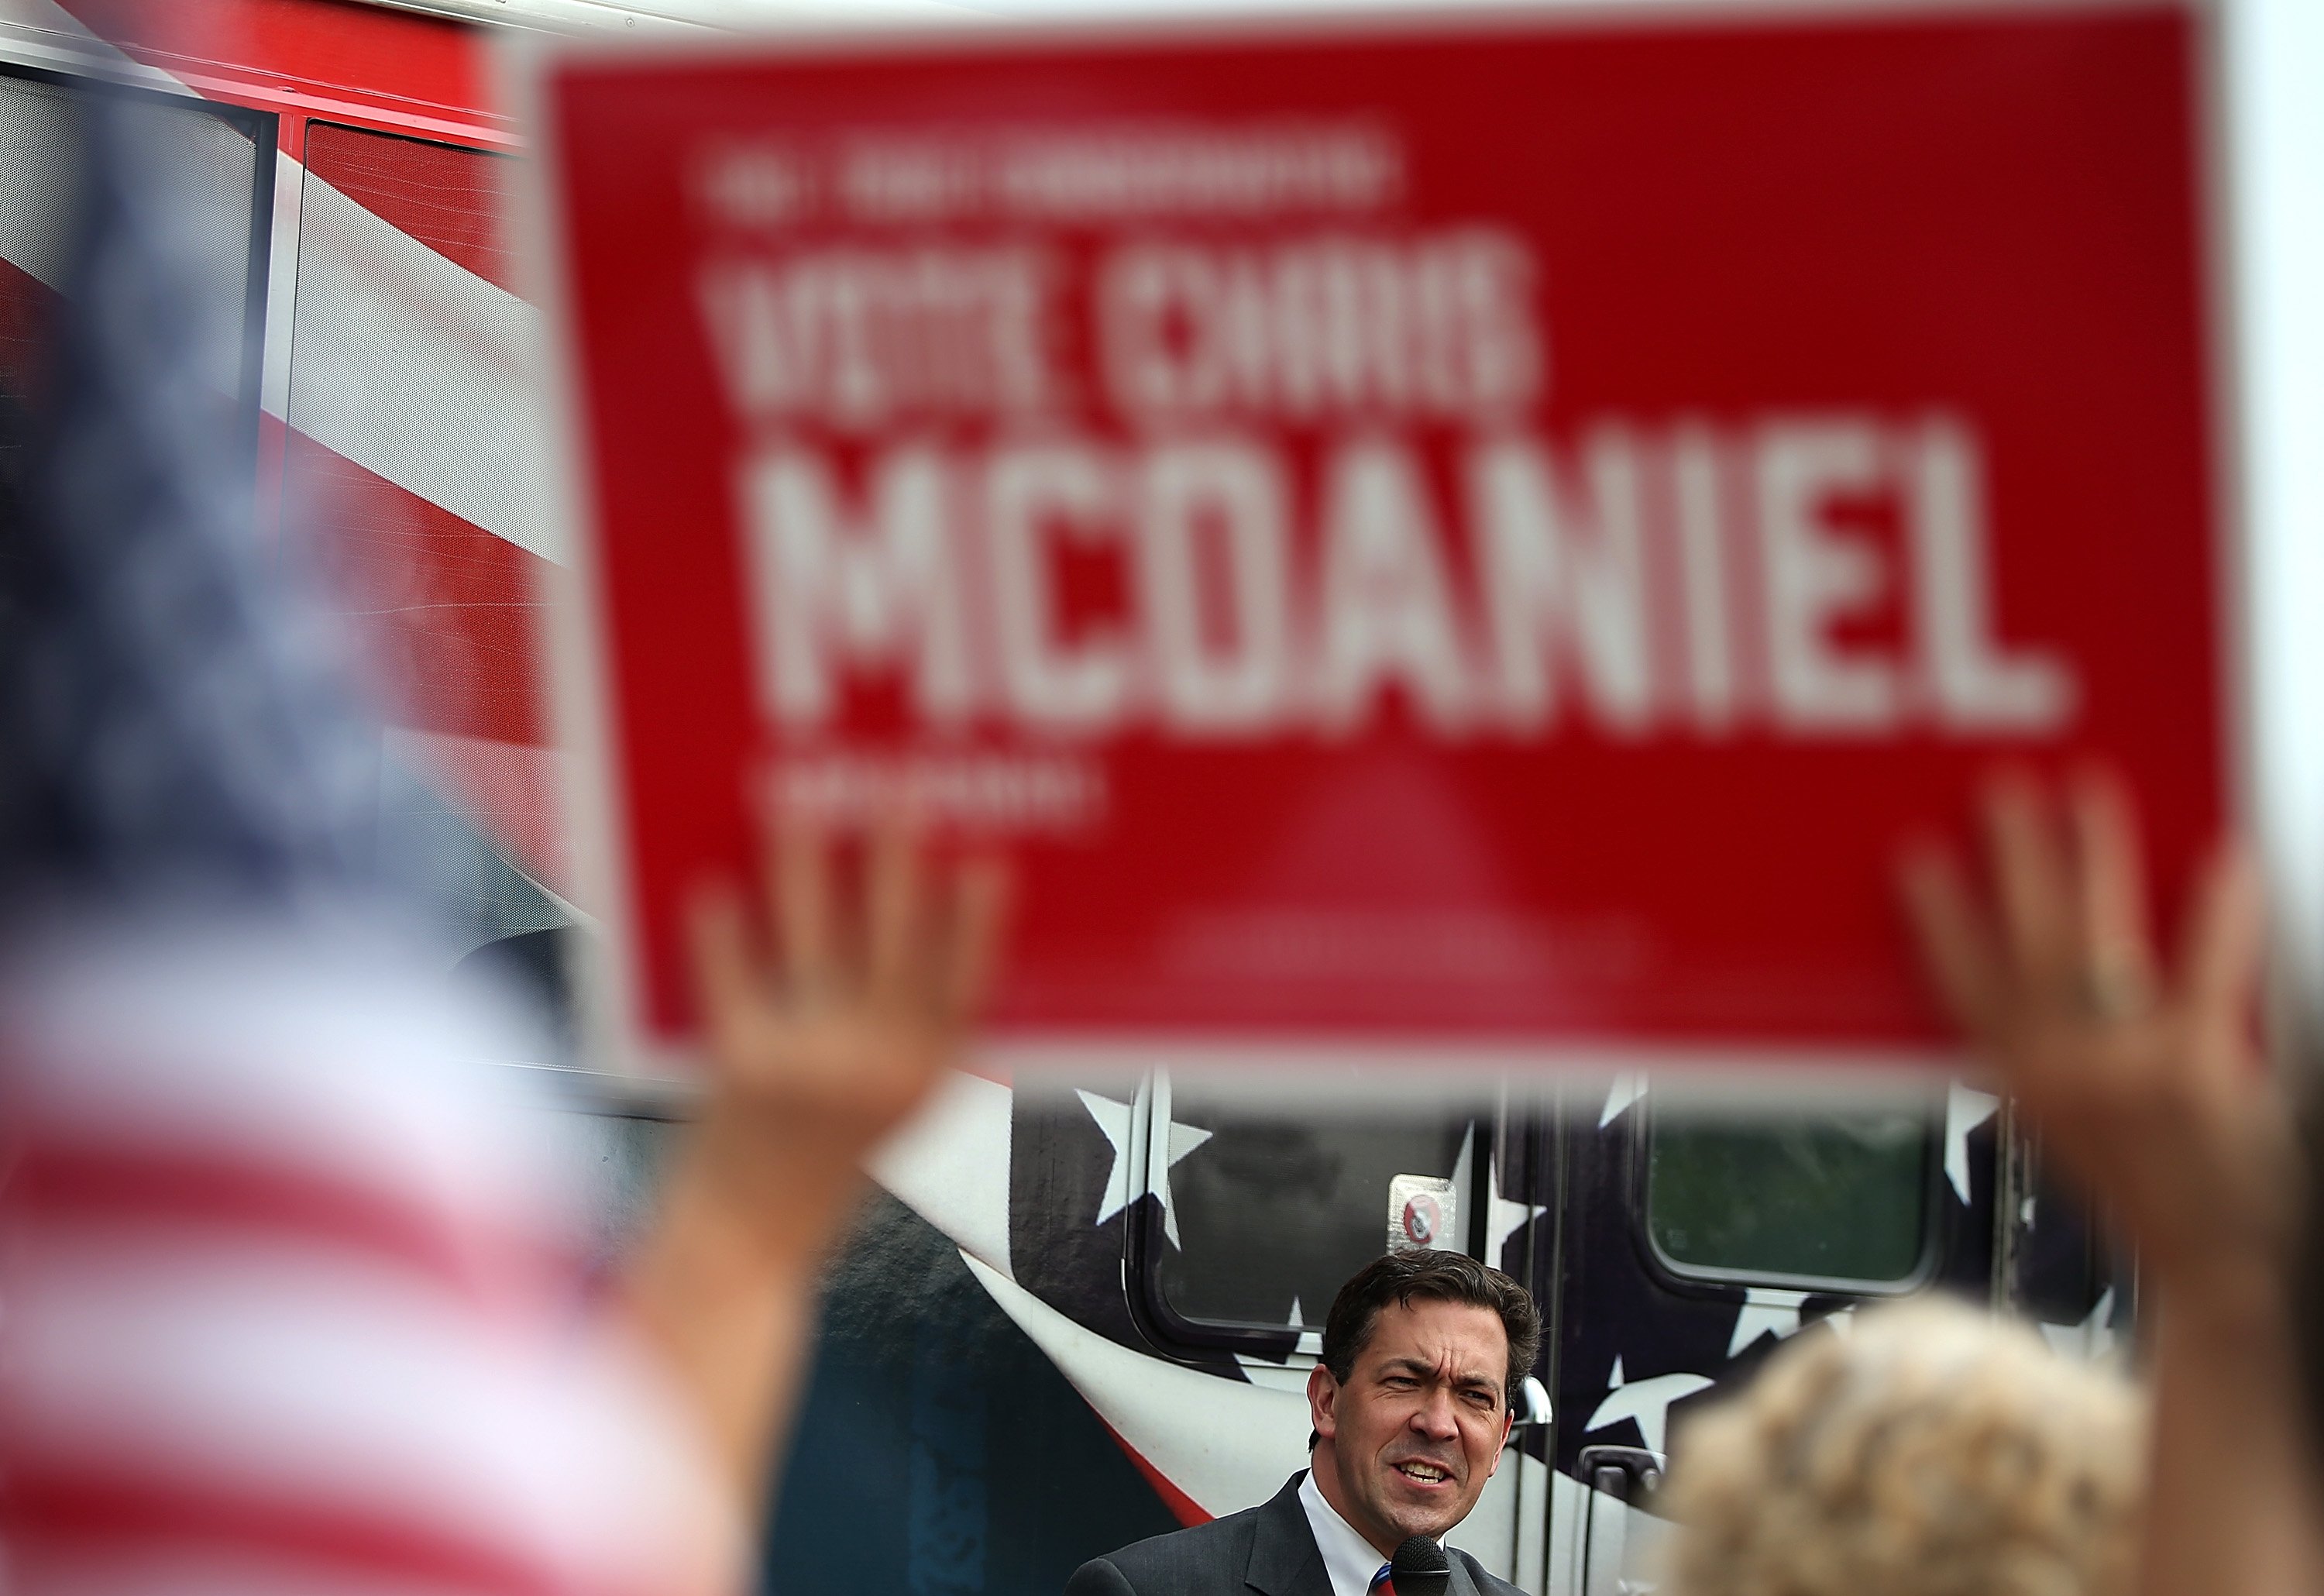 Republican candidate for U.S. Senate, Mississippi State Sen. Chris McDaniel speaks during a campaign rally on June 23, 2014 in Flowood, Miss. (Justin Sullivan—Getty Images)